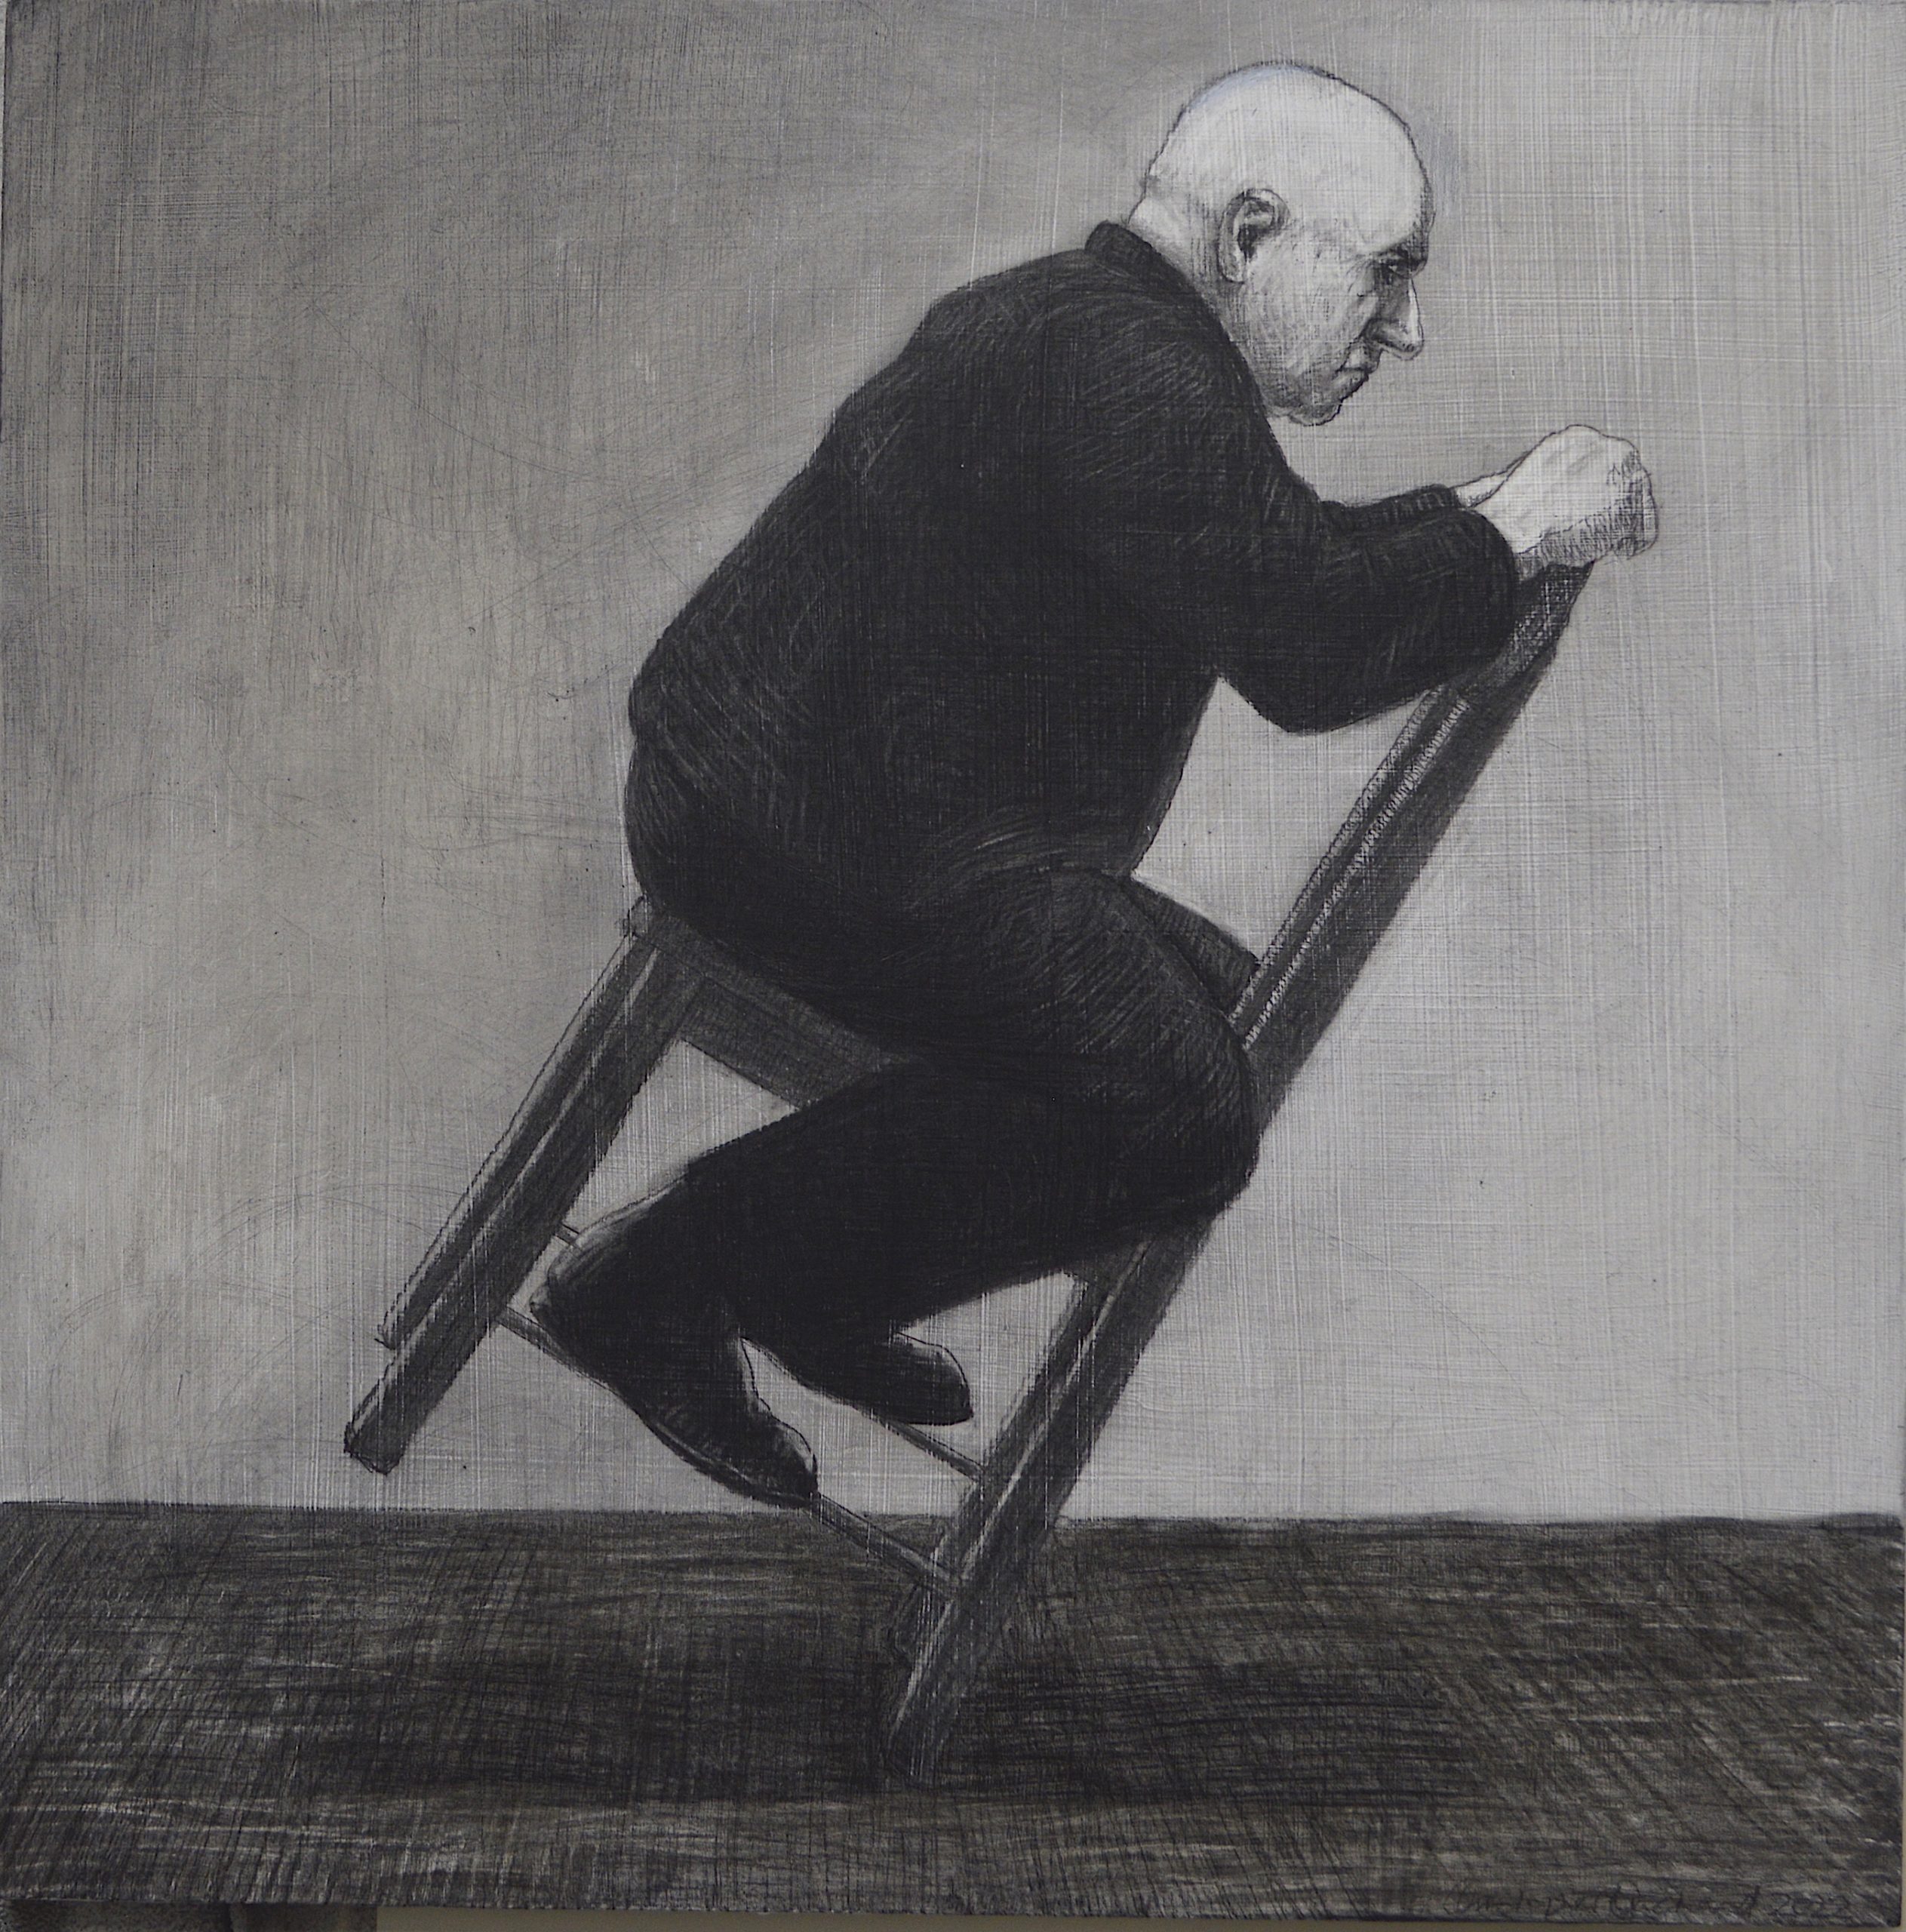 Christopher Orchard 'Tilt' charcoal on gesso on wood panel 40 x 40 $3,300